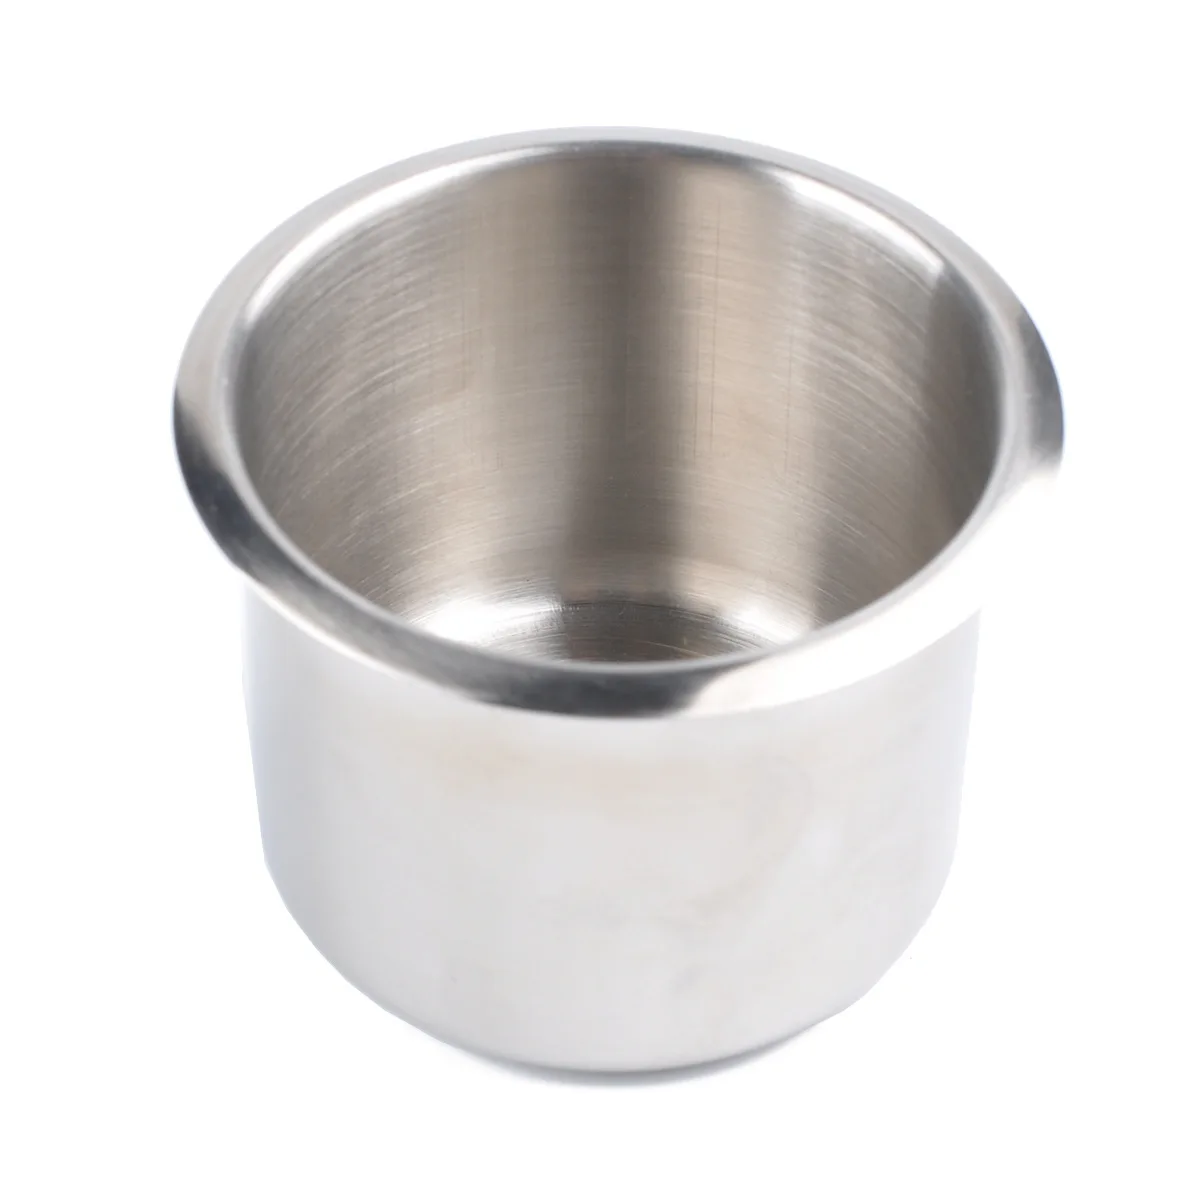 Car Cup Holder Stainless Steel Recessed Water Cup Drink Holder RV Accessories car cup holder stainless steel recessed water cup drink holder rv accessories